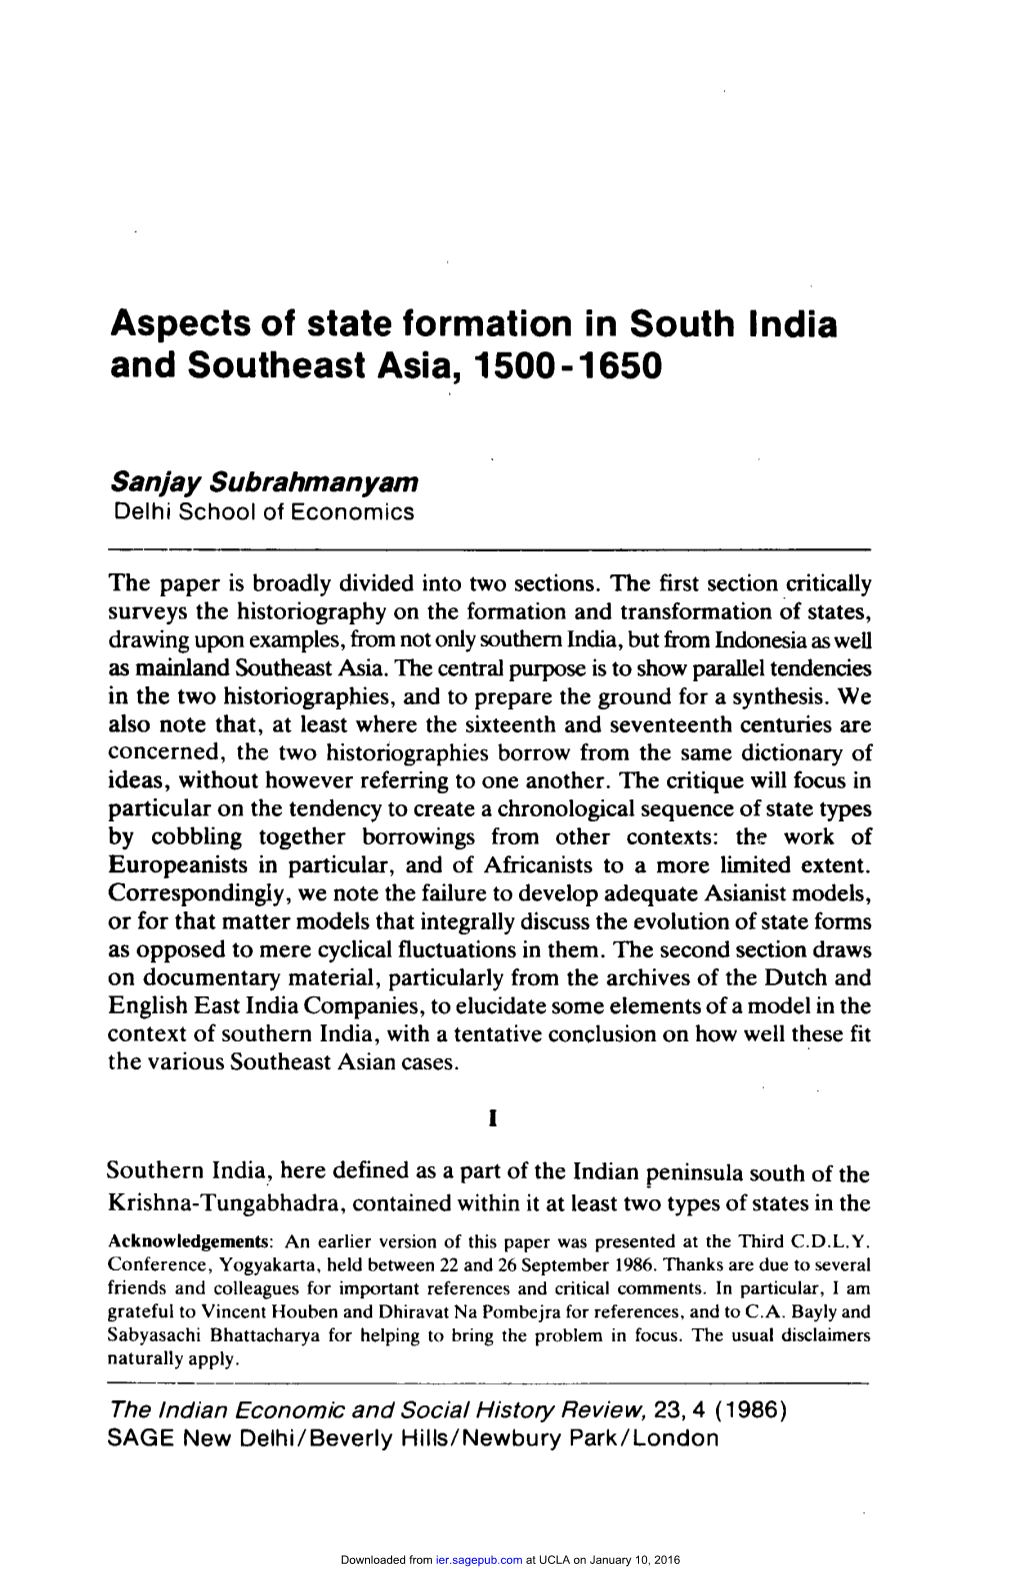 Aspects of State Formation in South India and Southeast Asia, 1500-1650